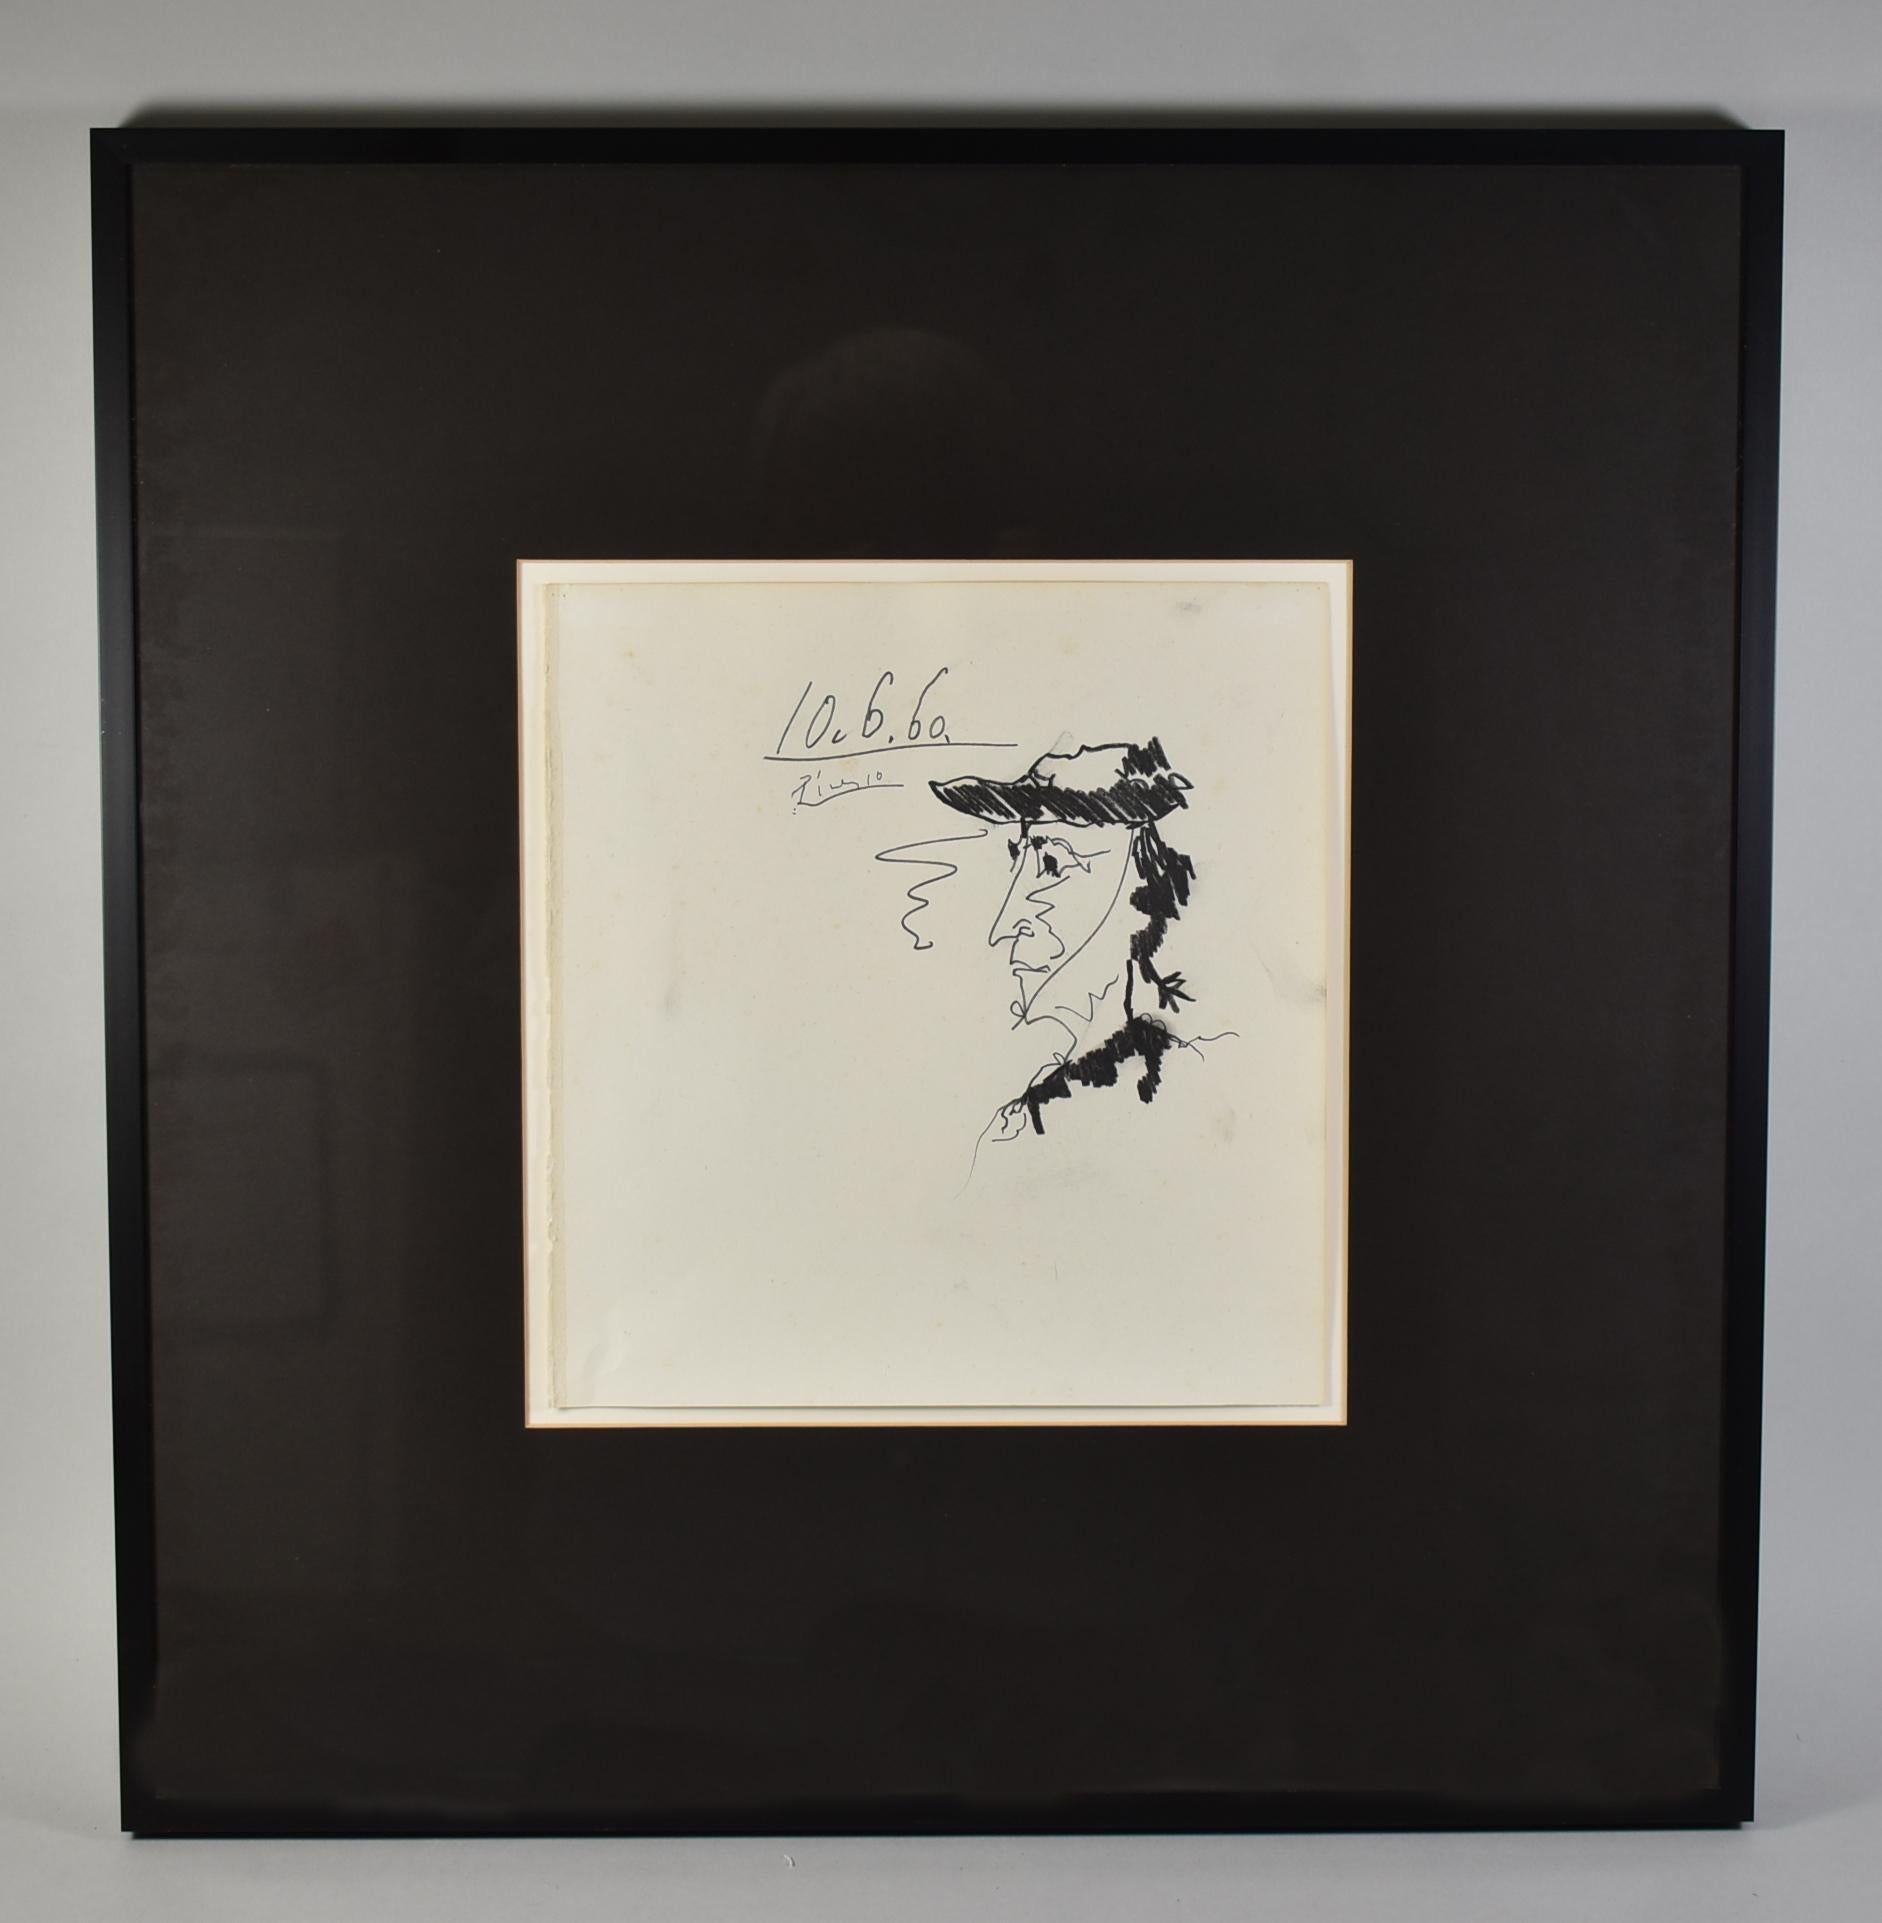 Original pencil drawing of a mans portrait from a sketch book dated and signed by Pablo Picasso 1960. Framed. Image is 10